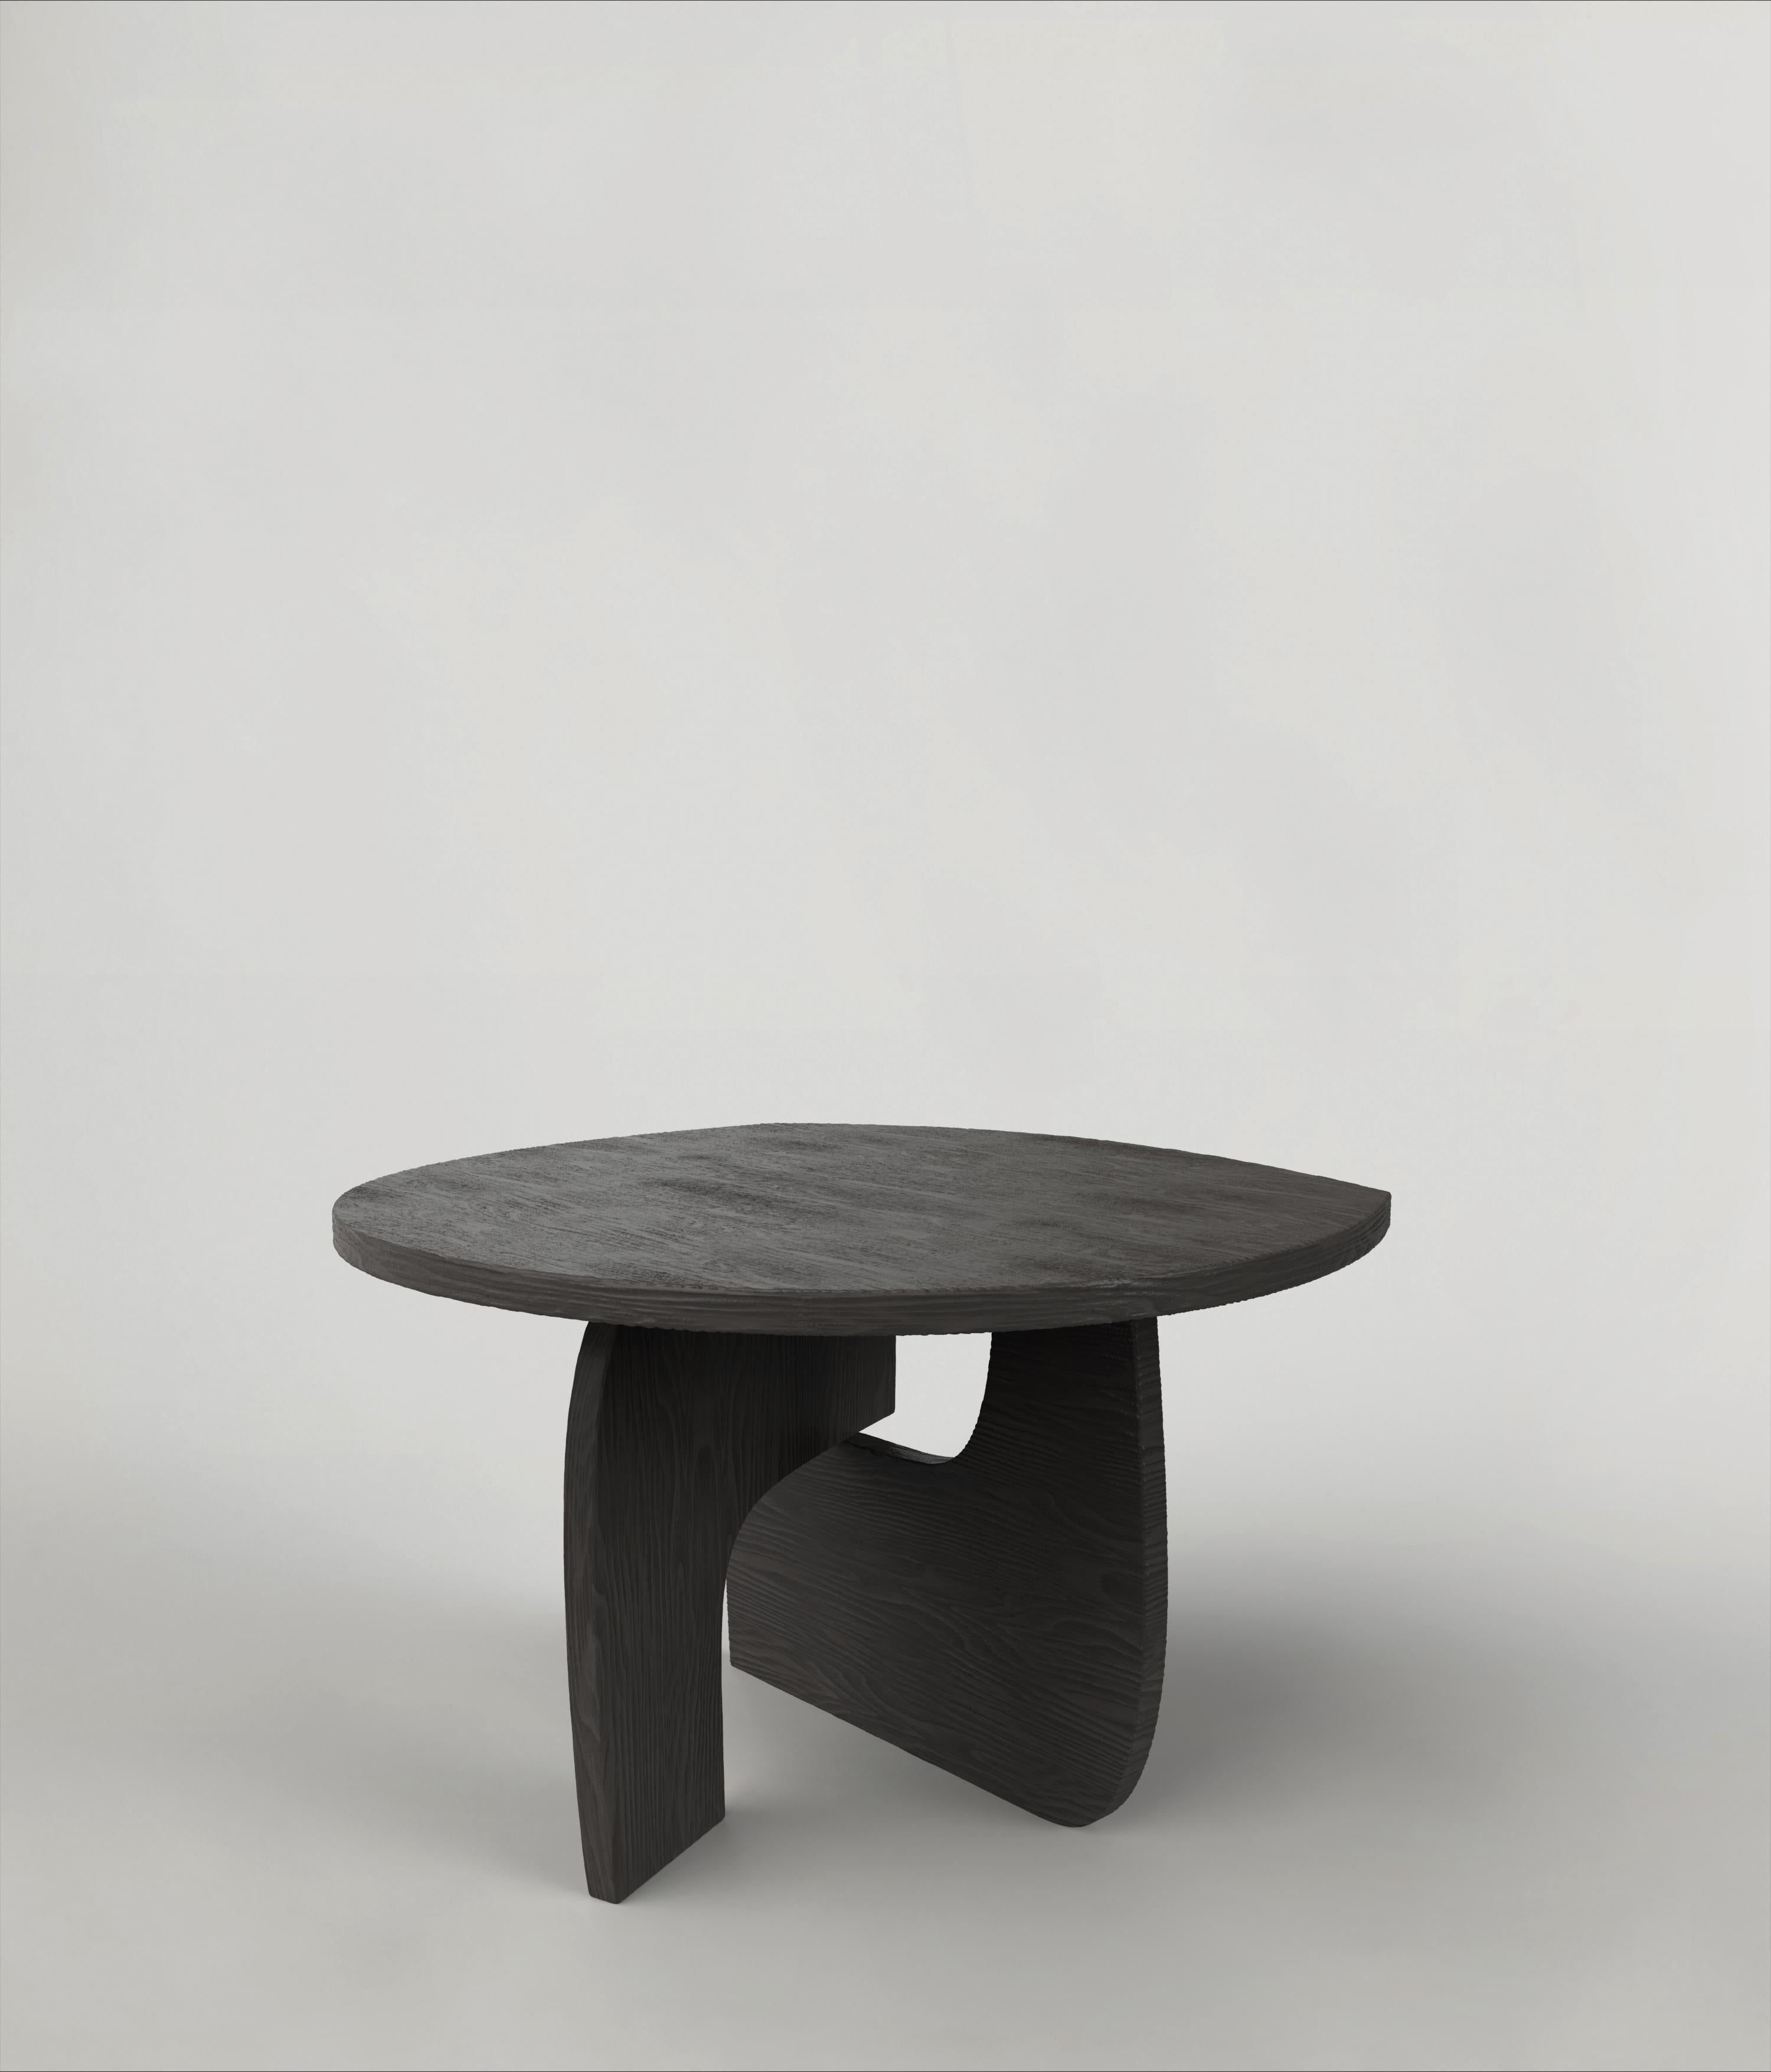 Italian Contemporary Limited Edition Signed Charred Table, Reef V2 by Edizione Limitata For Sale